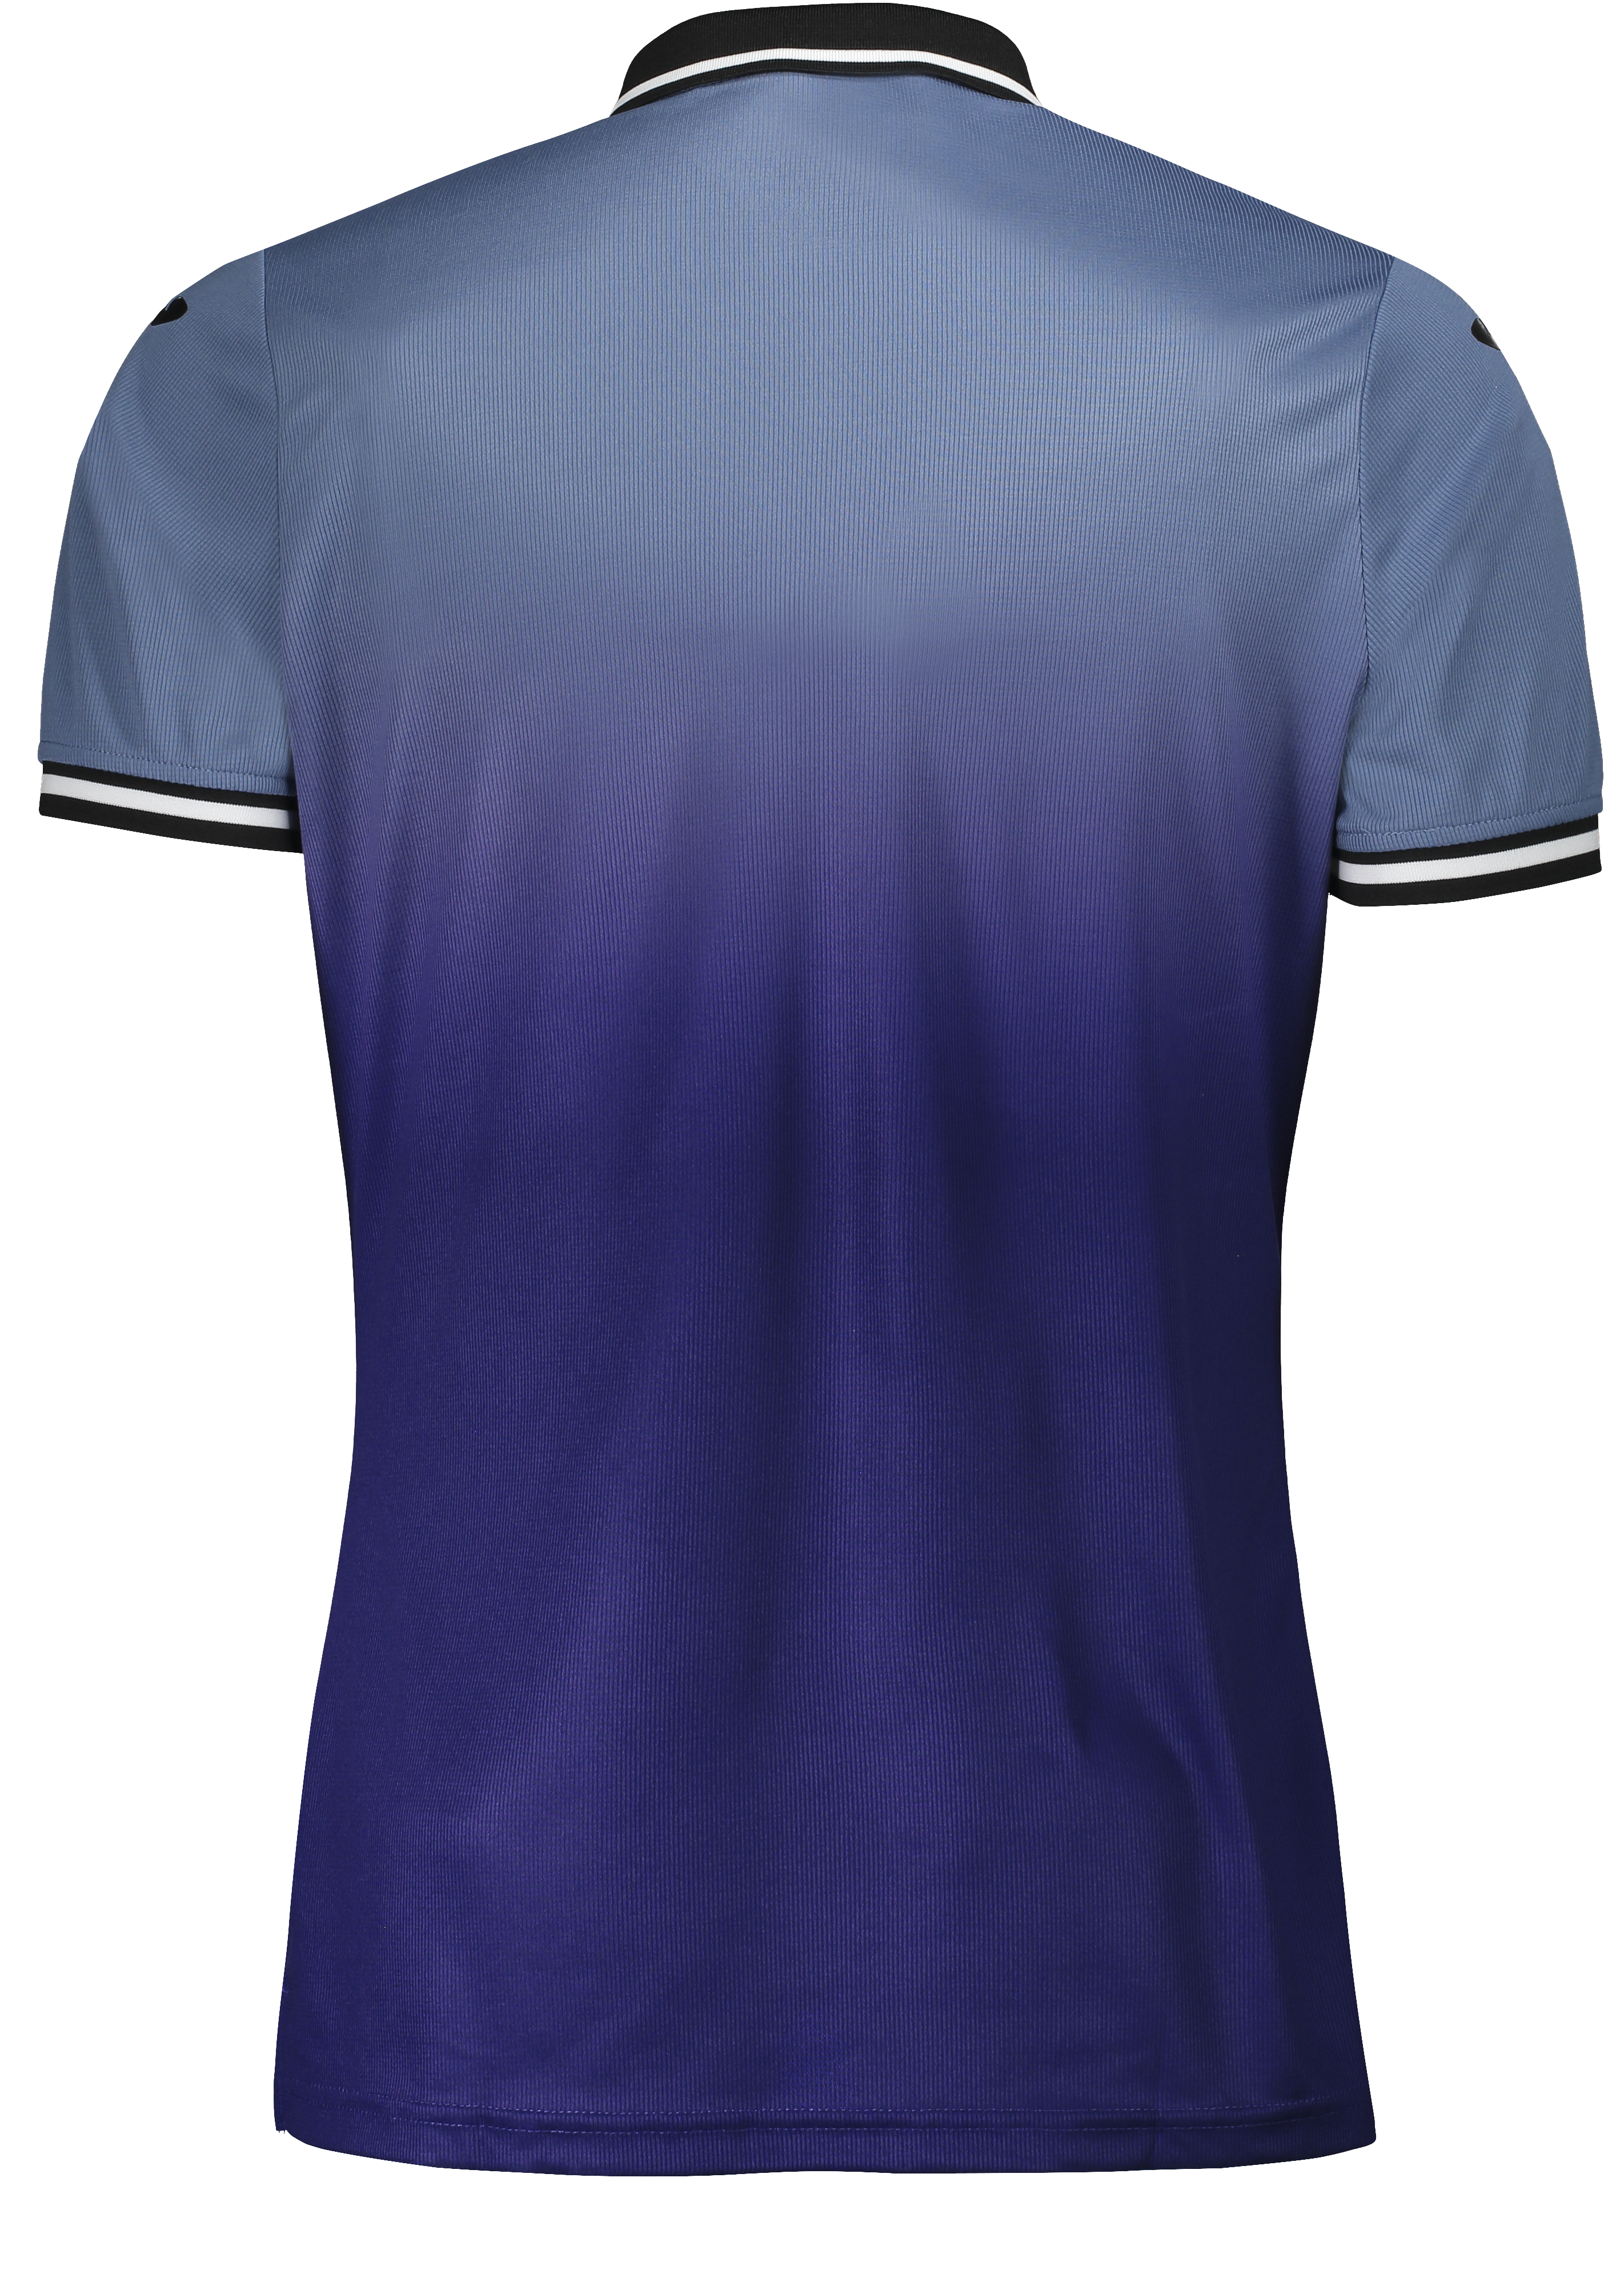 RSCA 4th Jersey 2022/2023 is-hover